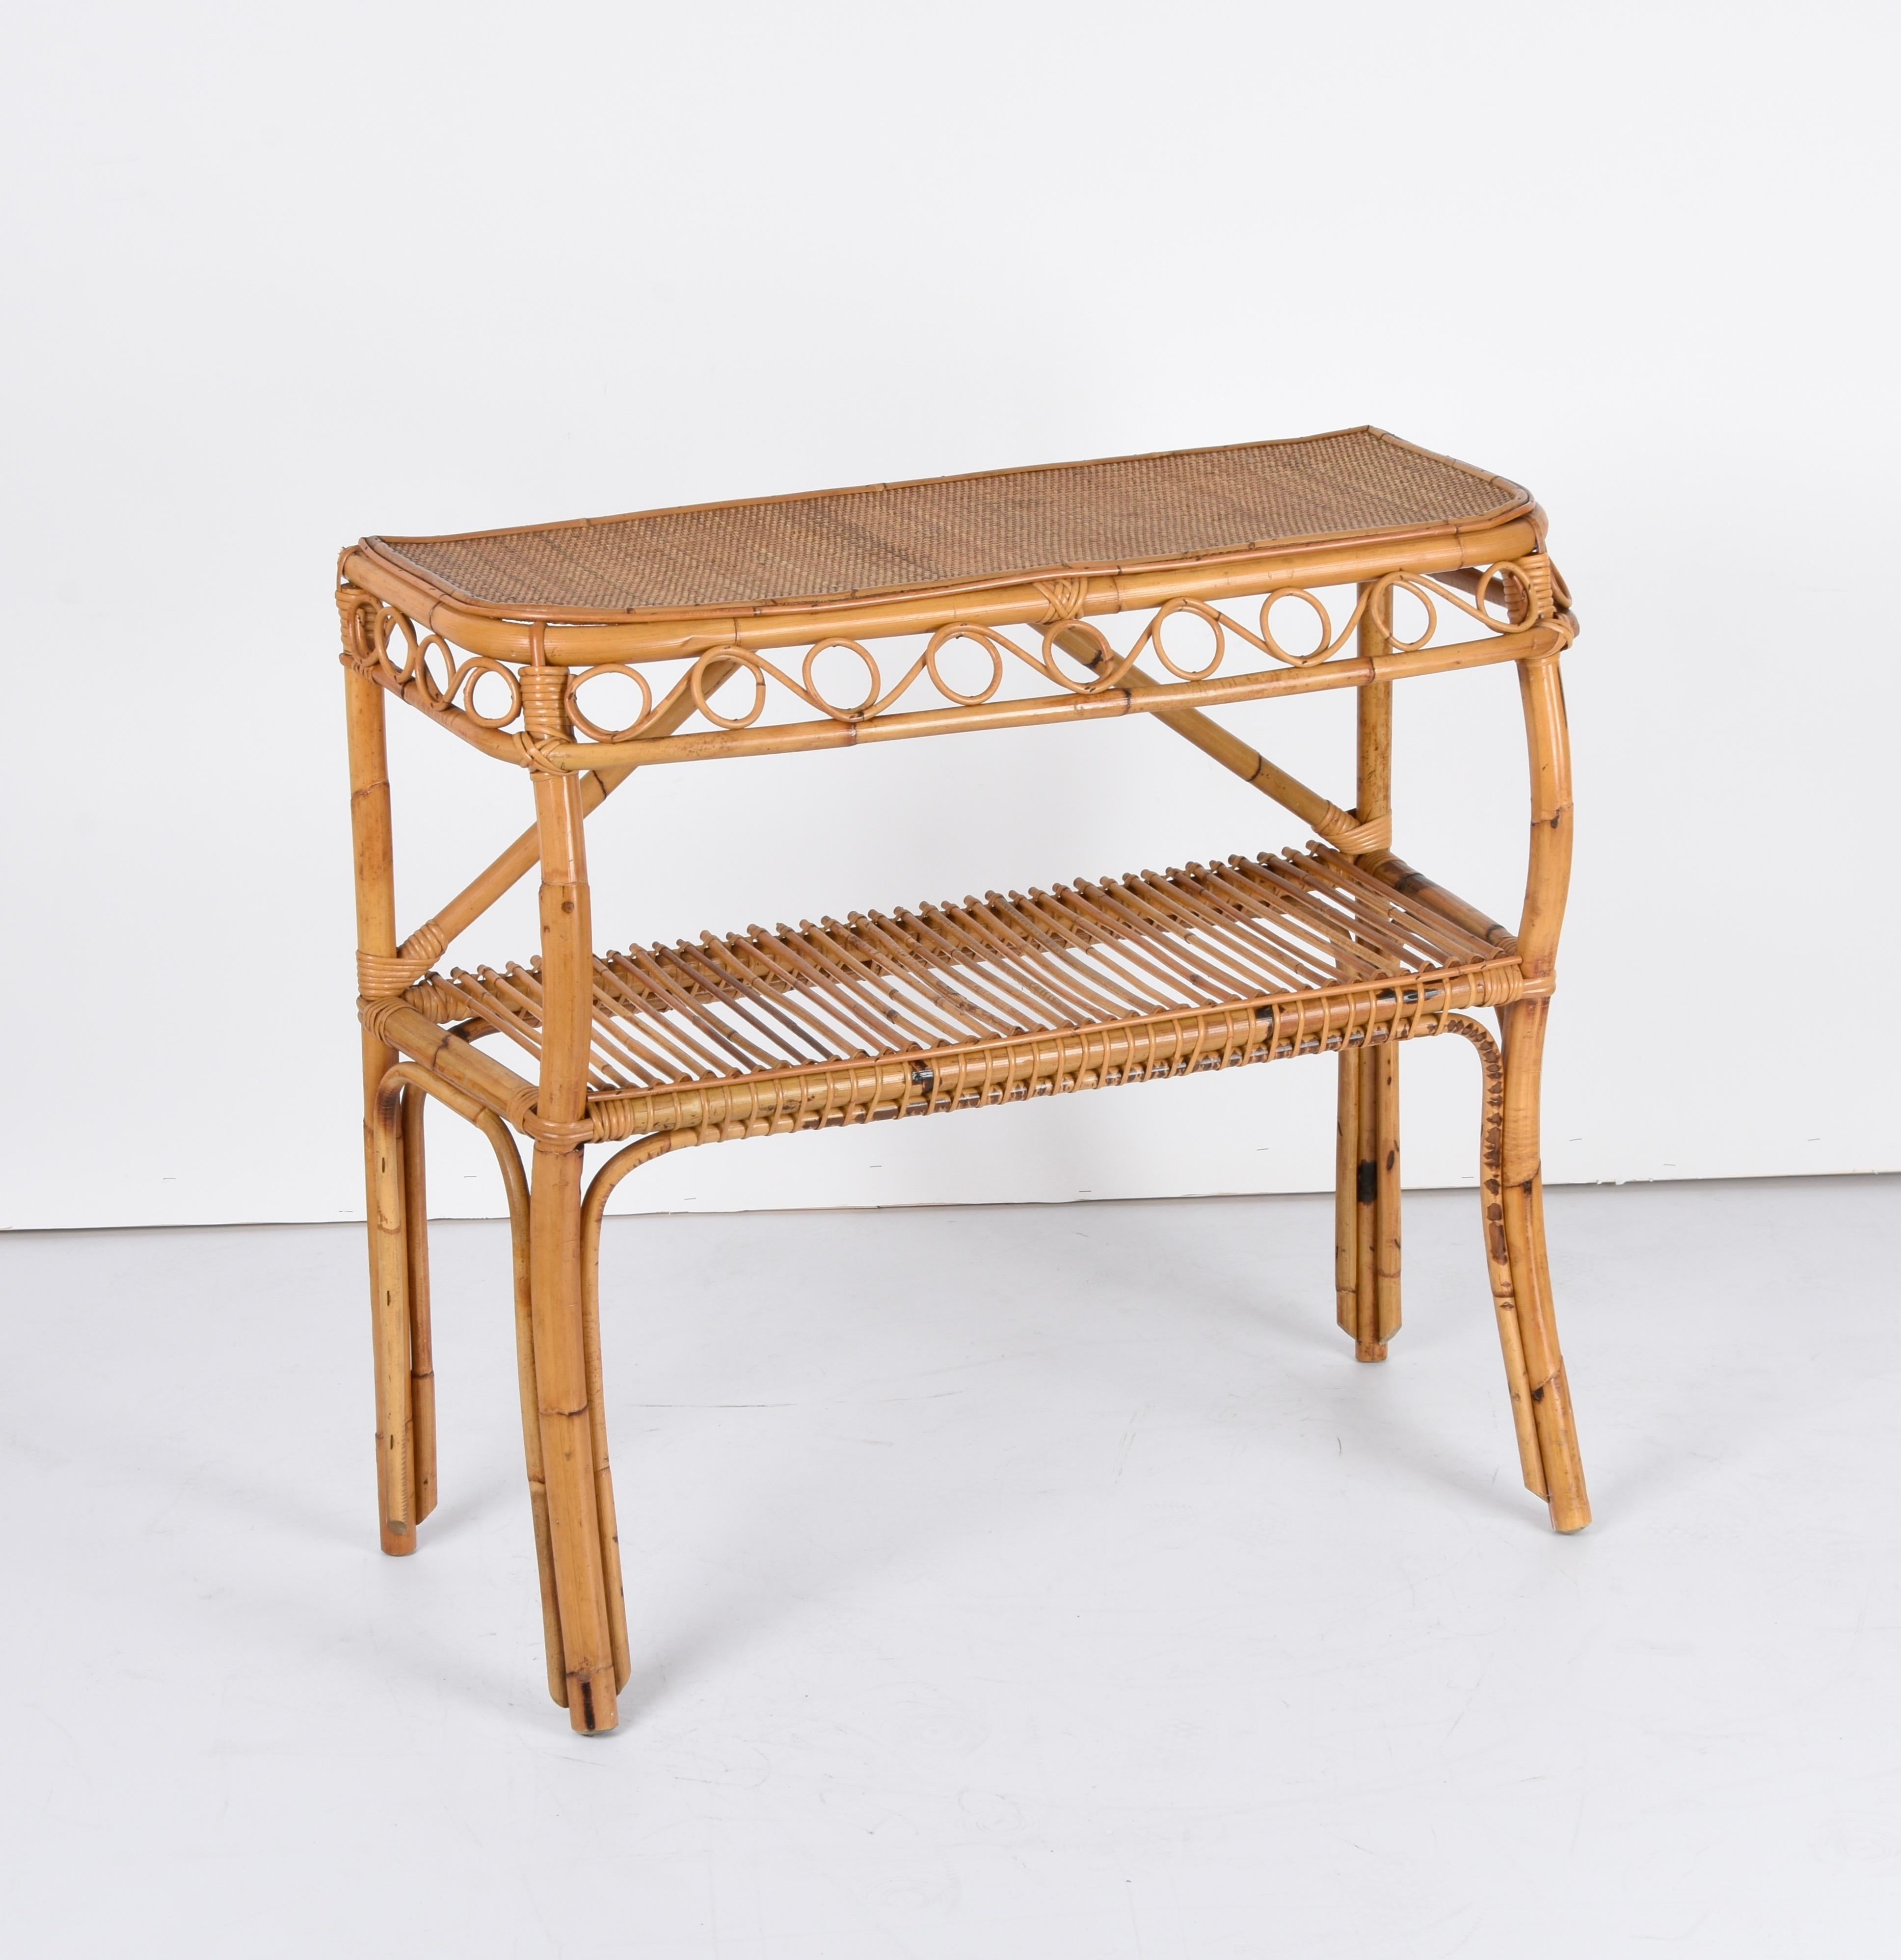 Stunning console table in bamboo and rattan. This piece was produced in the style of Franco Albini in Italy during the 1970s.

This console has four bamboo legs, with a shelf in the middle of the structure featuring a rattan decoration.

A